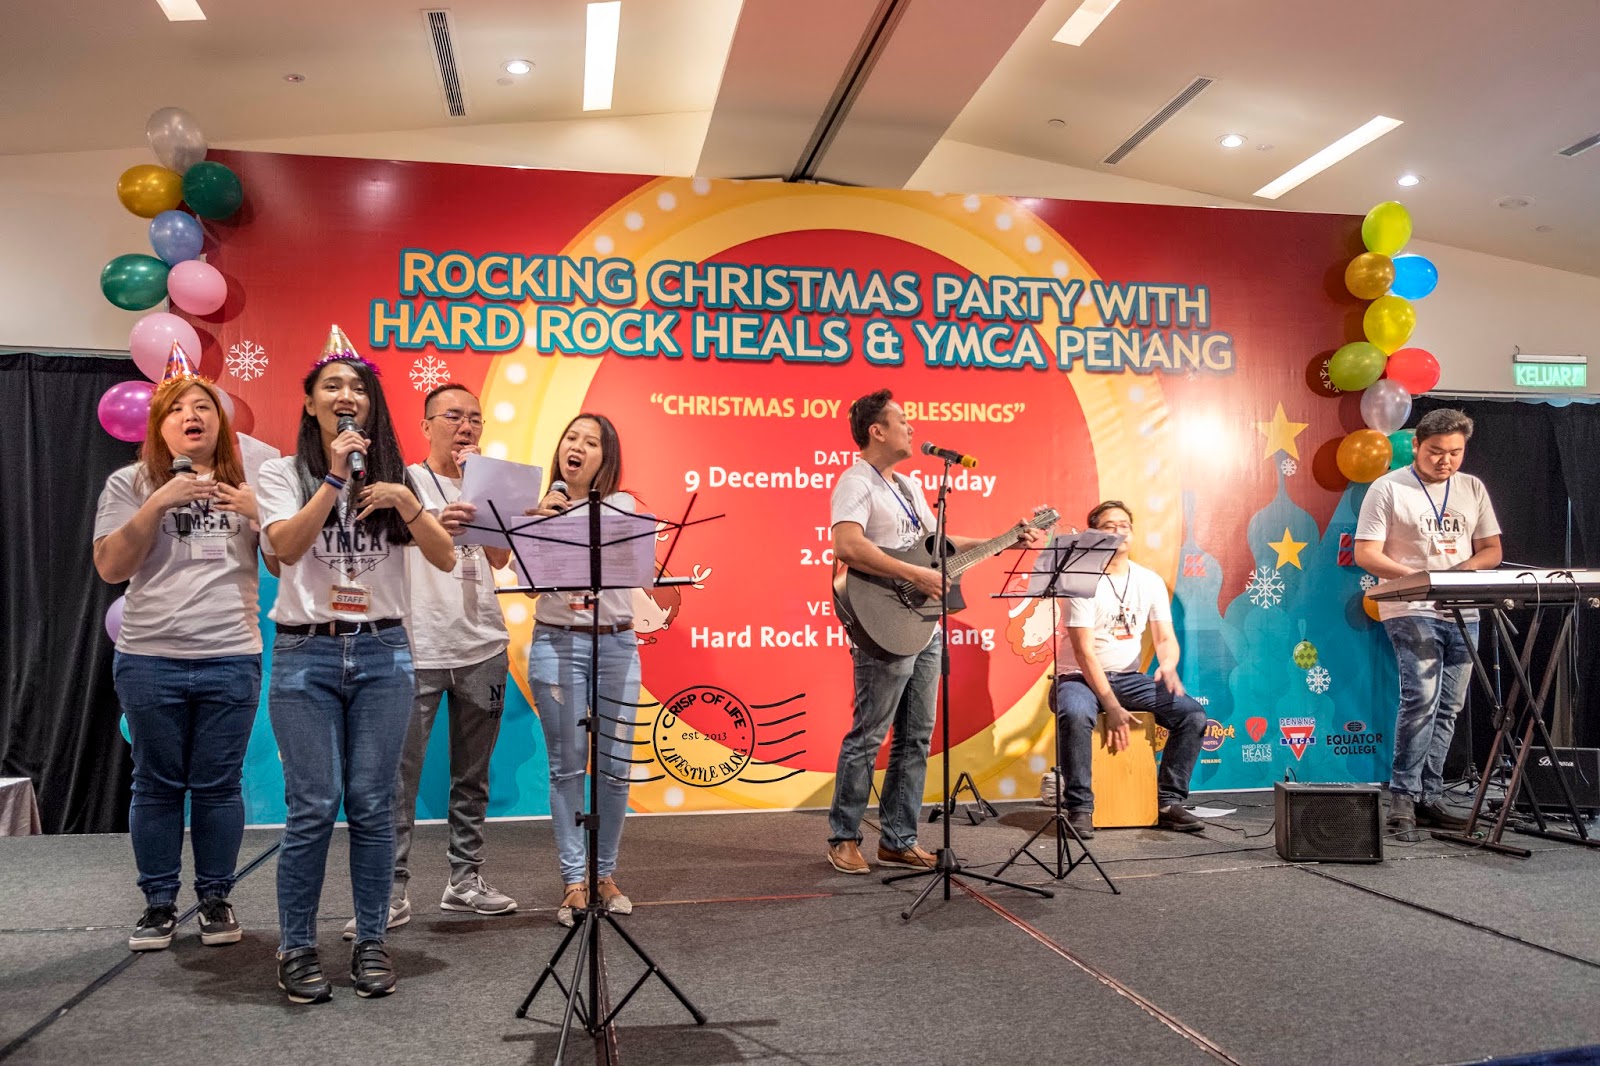 Rocking christmas Party with Hard Rock Heals & YMCA Penang